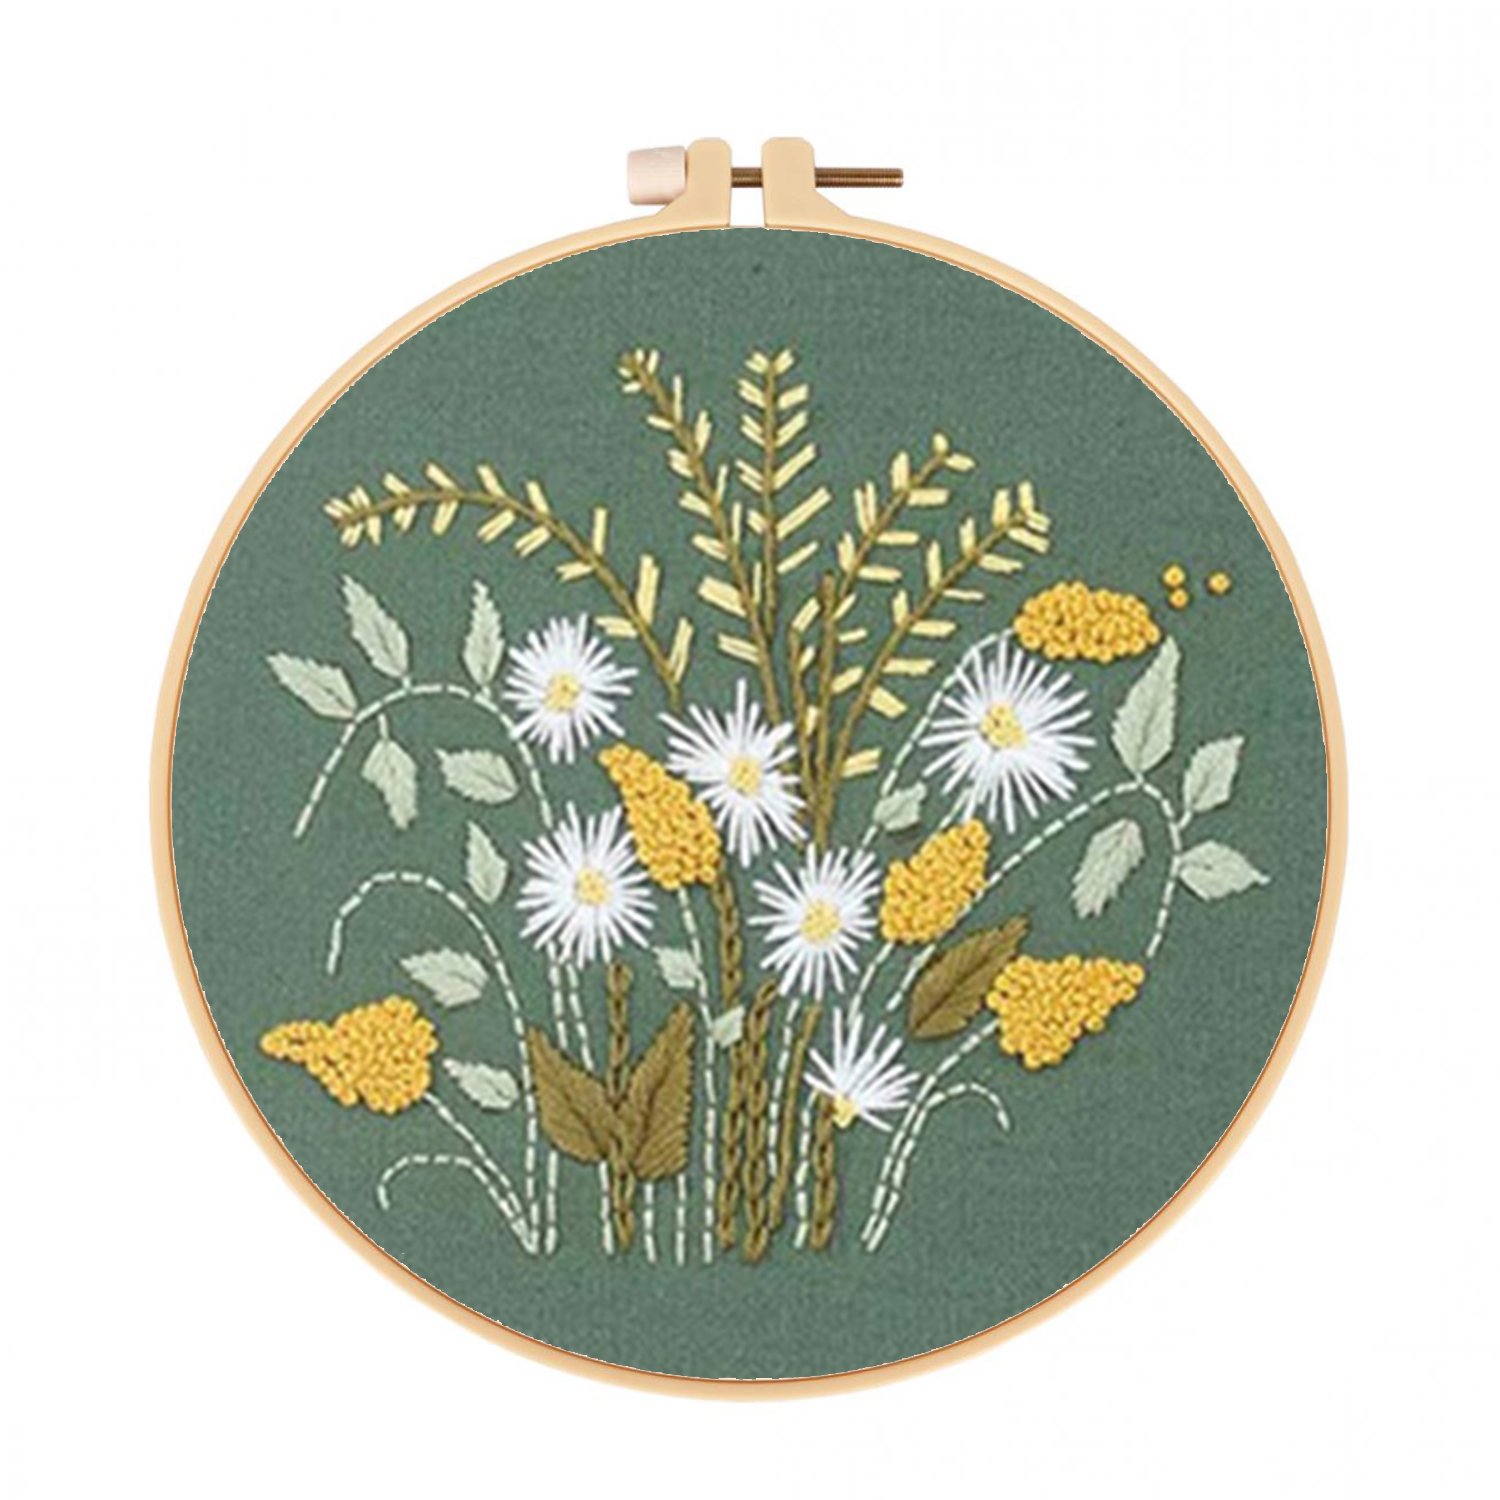 Handmade Embroidery Kit Cross stitch kit for Adult Beginner- Floral Pattern